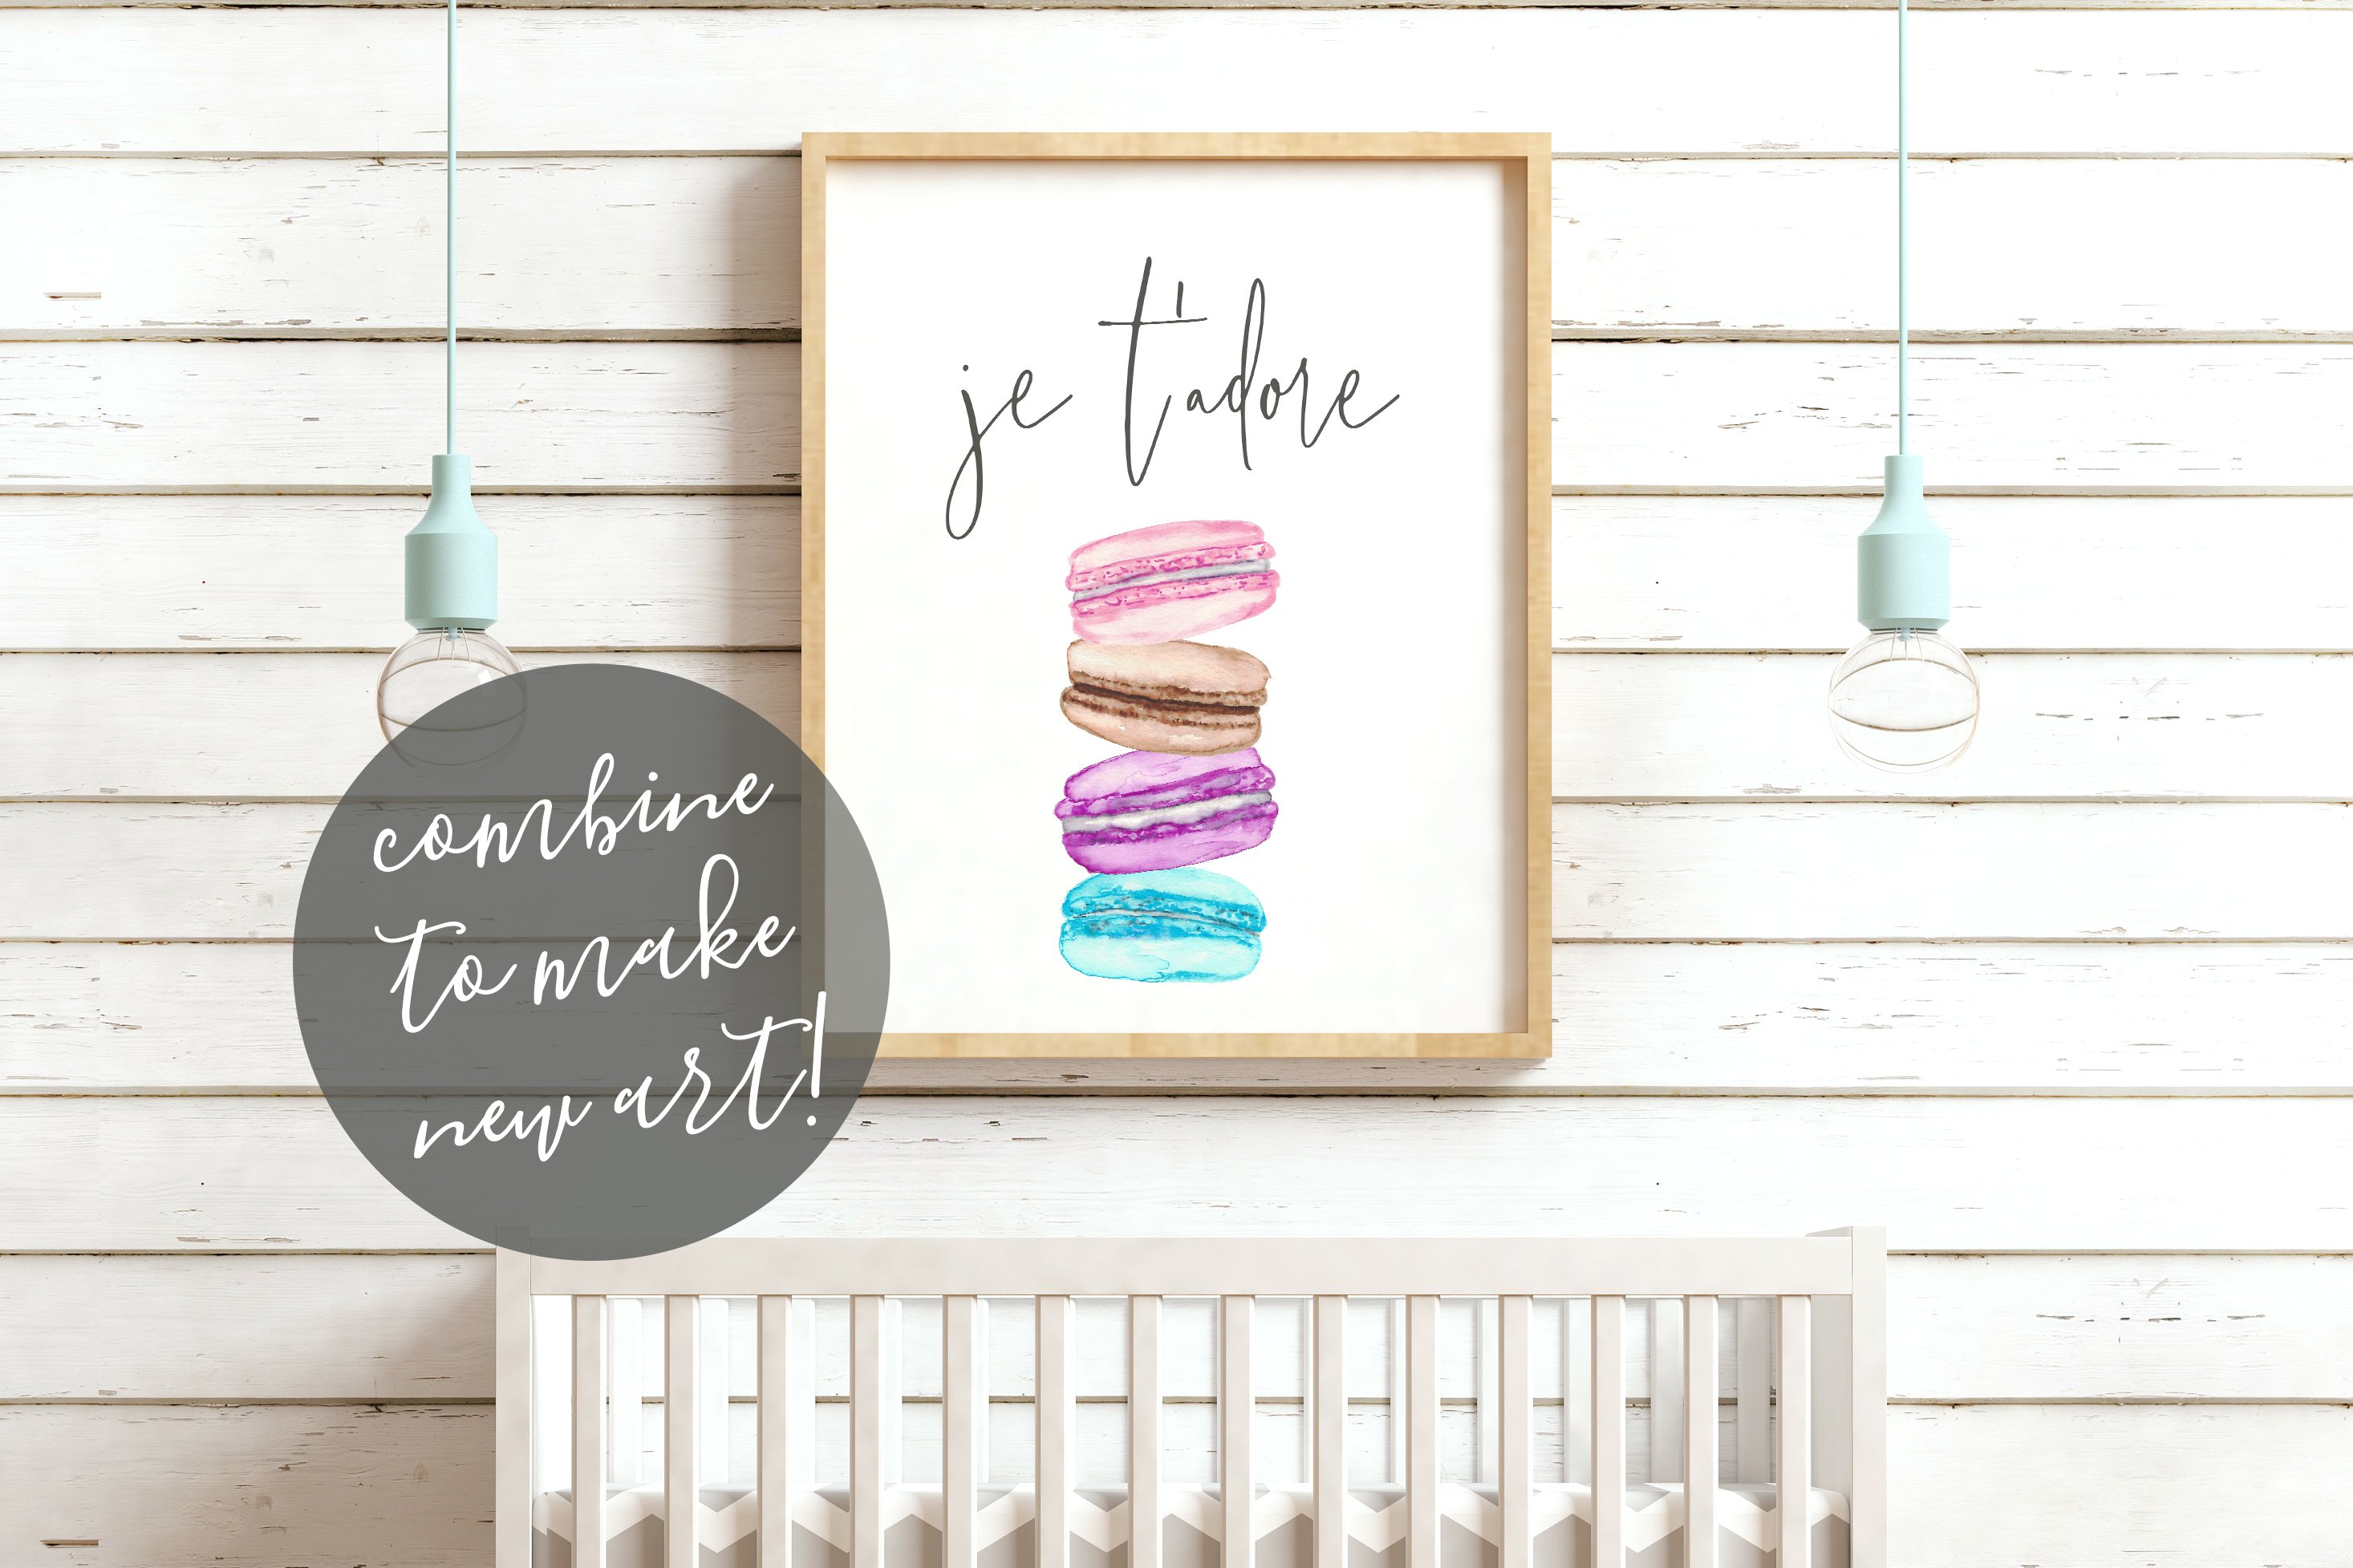 Cool simple poster with macaroons.